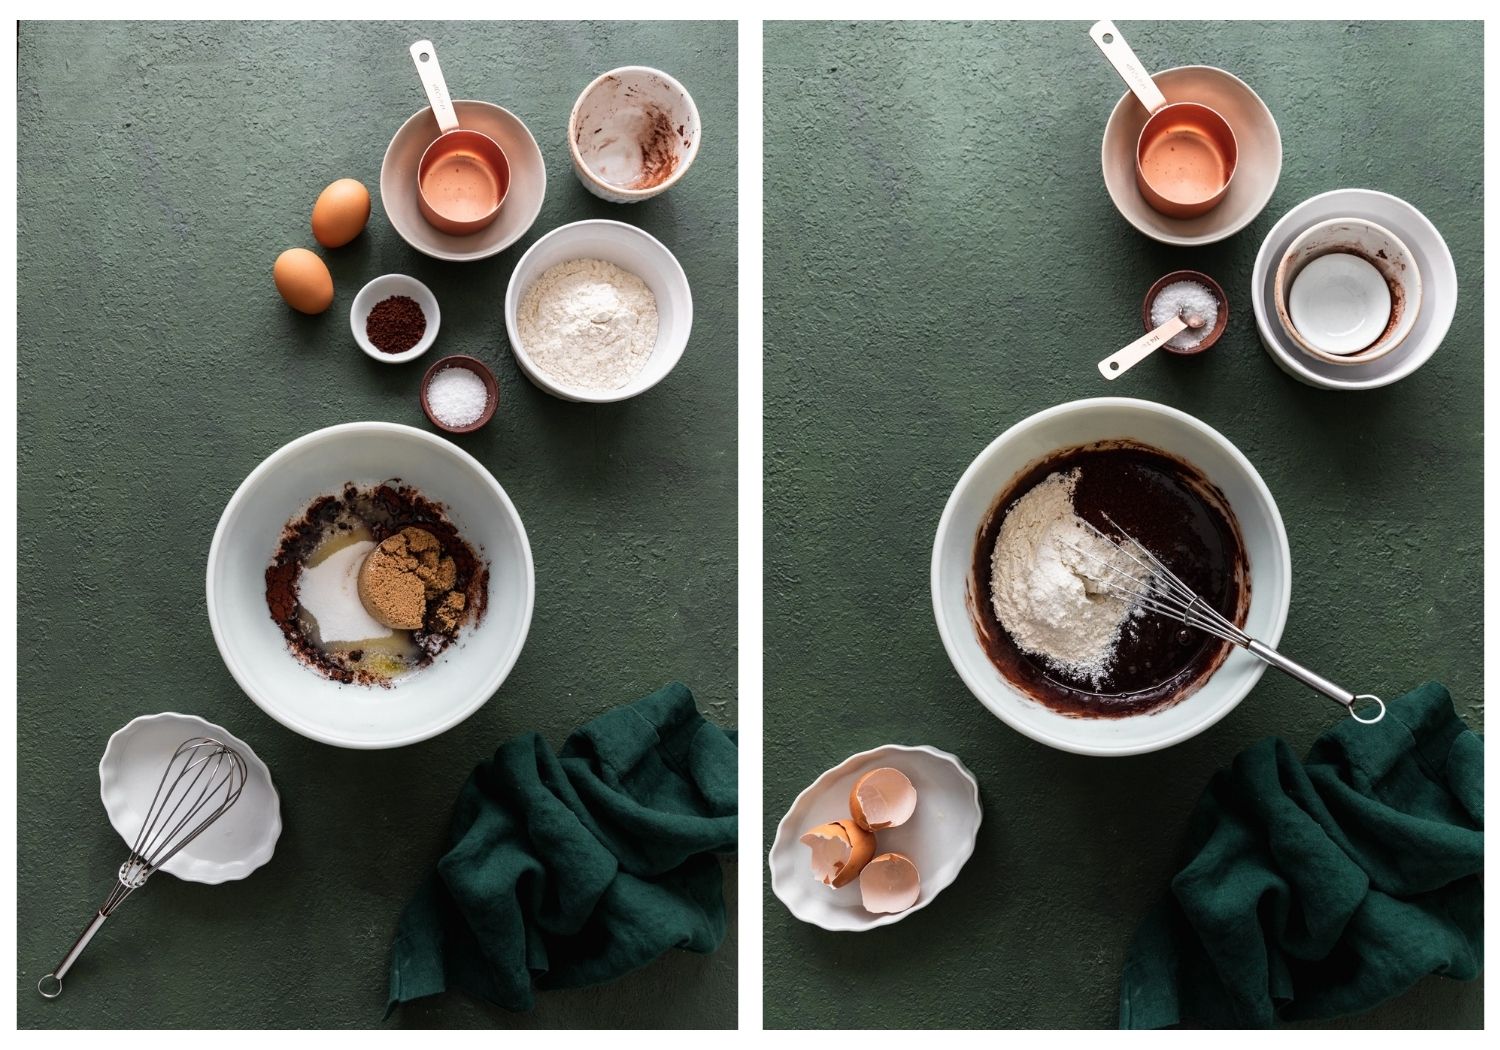 Two images; on the left, a white bowl on a dark green table with wet baking ingredients, surrounded by more baking ingredients. On the right, the bowl is filled with chocolate batter and flour.